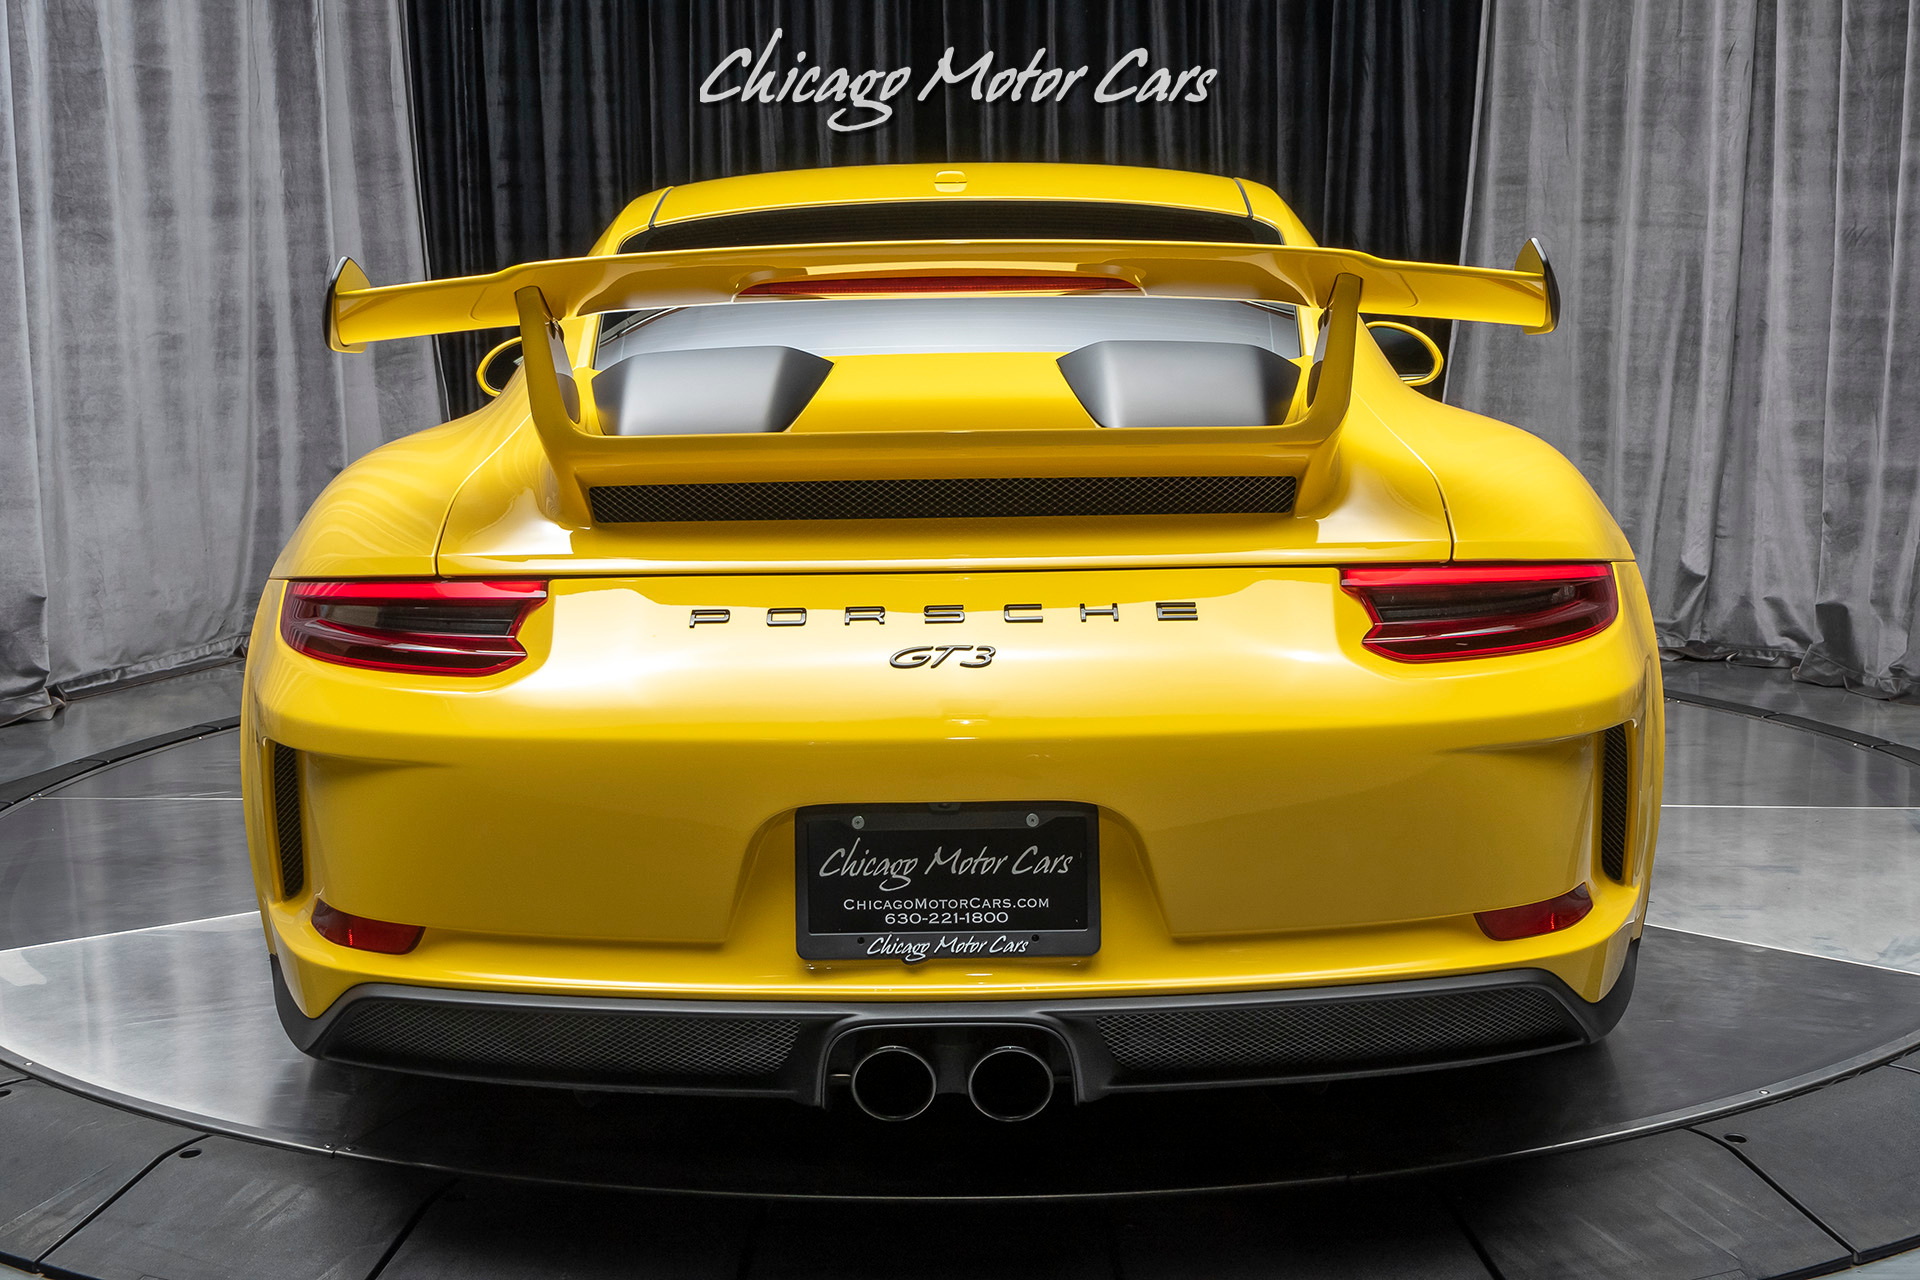 Used-2018-Porsche-911-GT3-Coupe-MSRP-185k-CERAMIC-COATED-PDK-TRANS-ONLY-2K-MILES